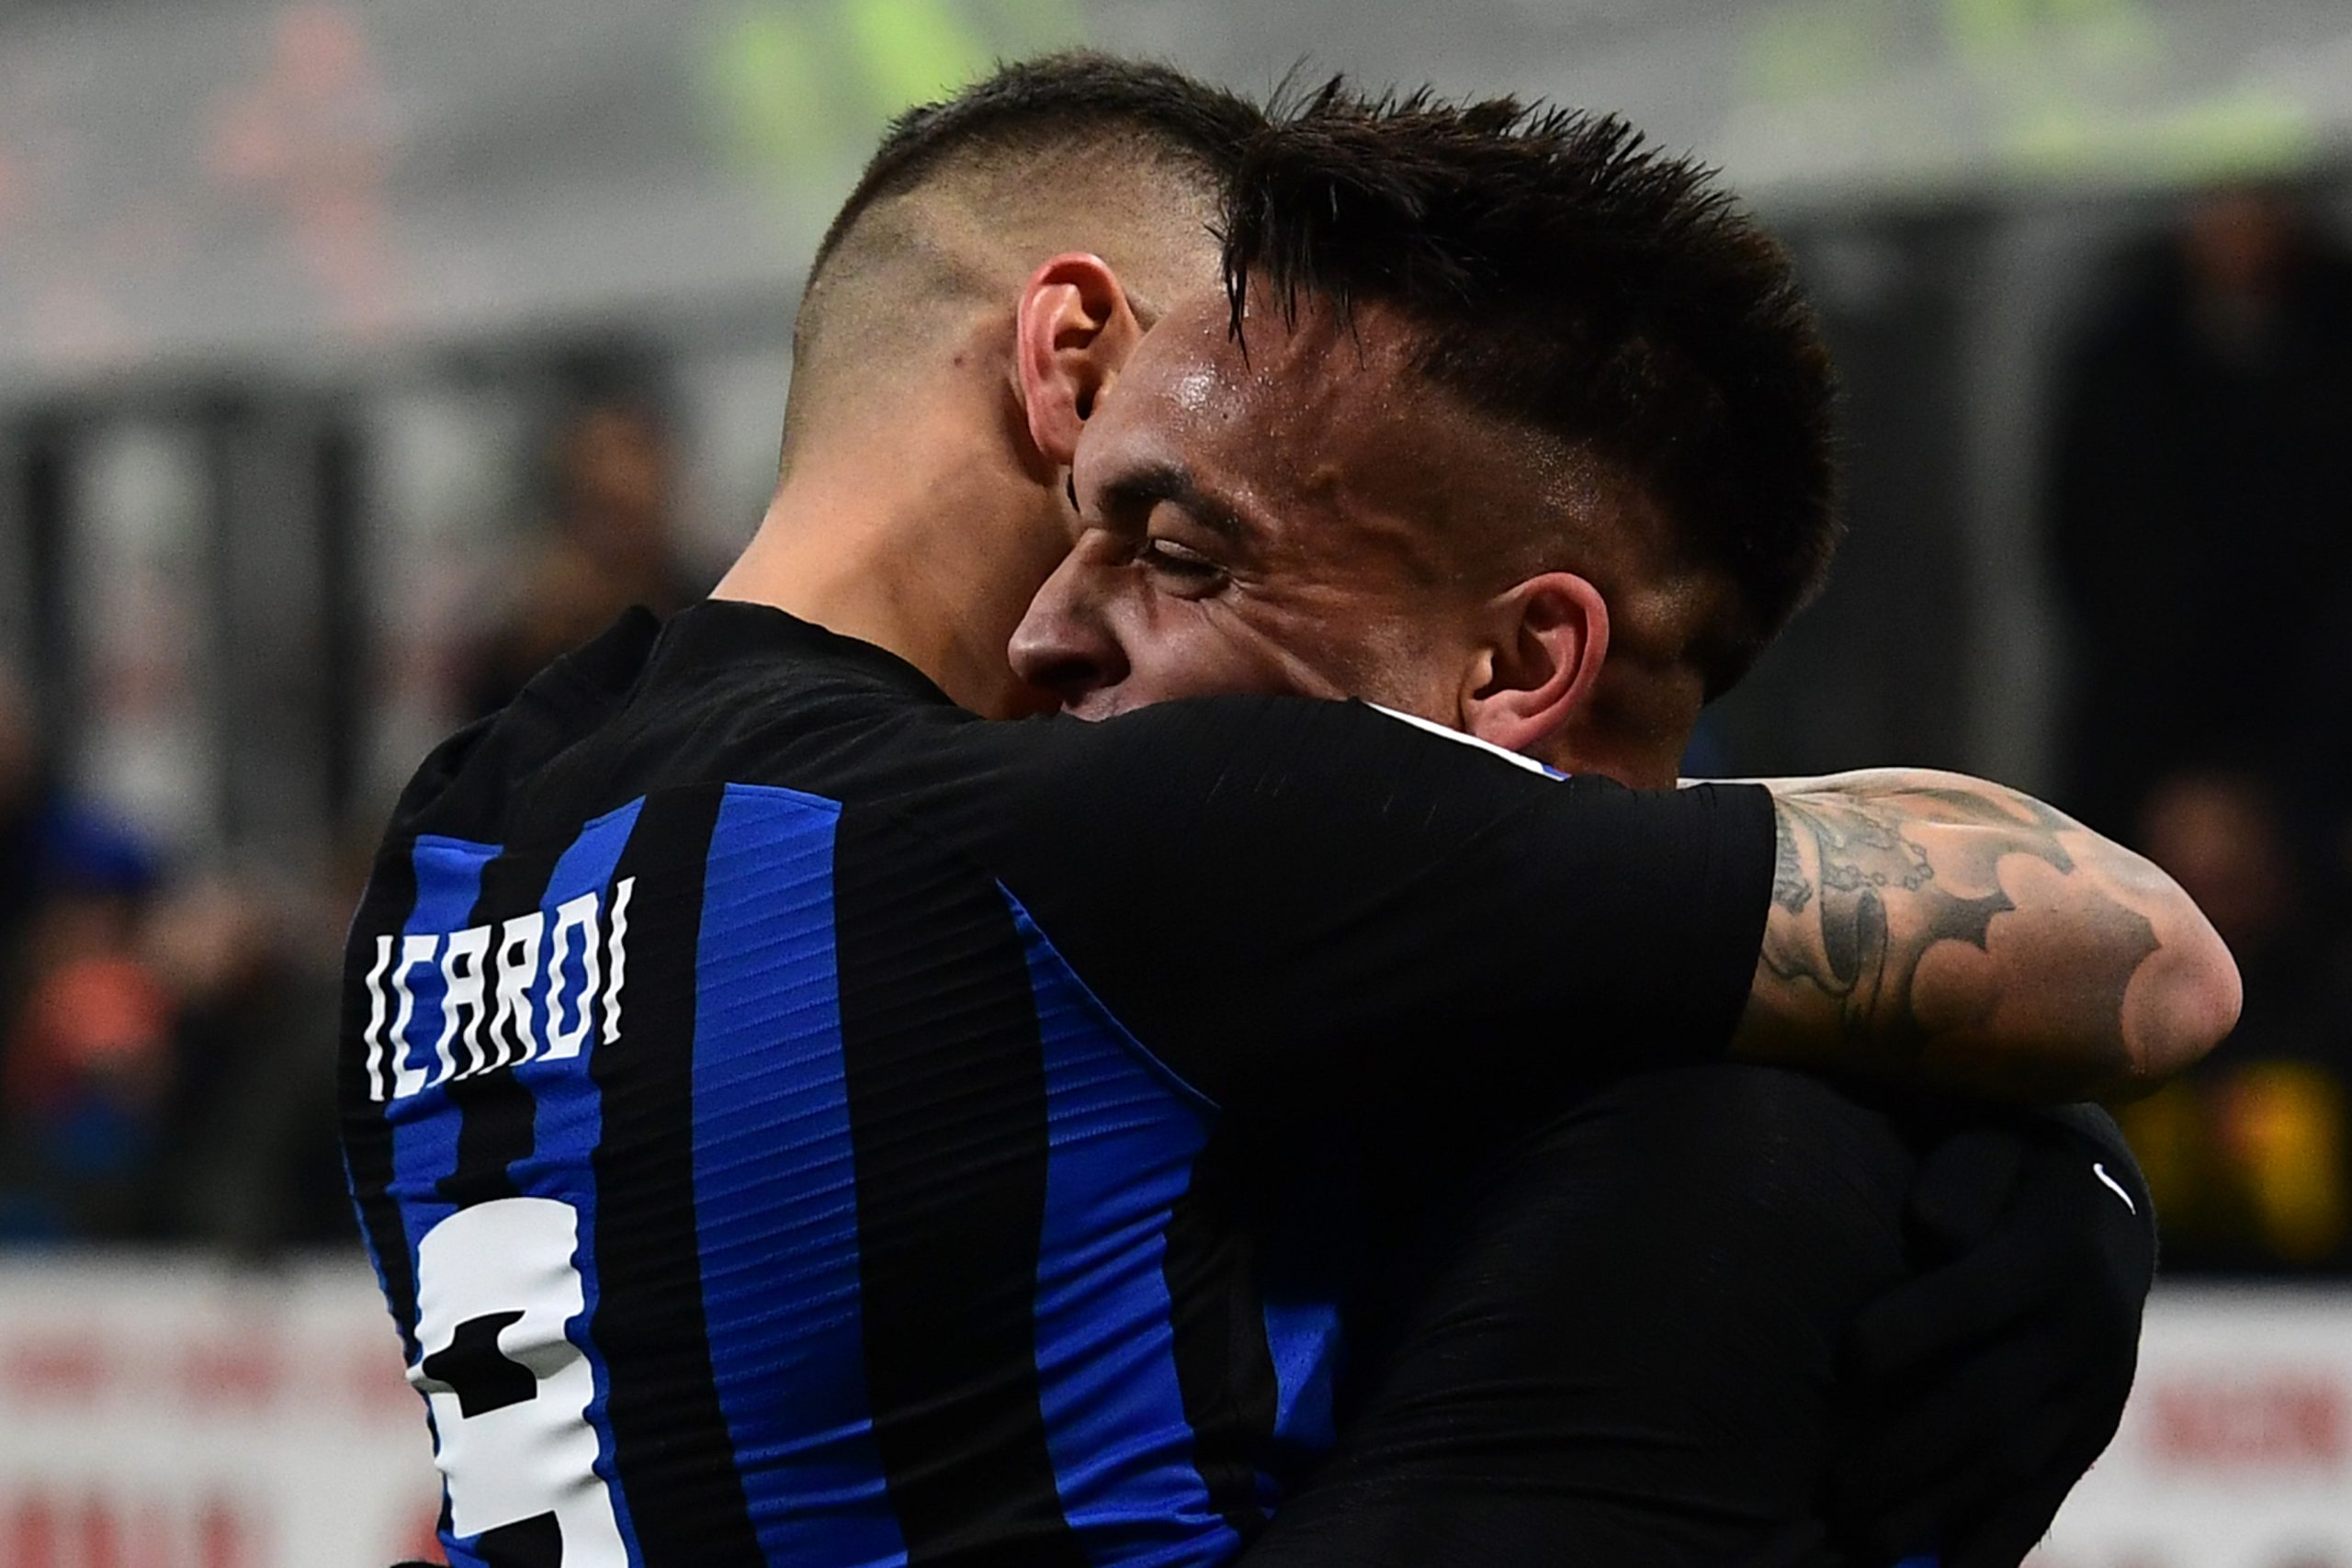 Mauro Icardi e Lautaro Martinez - Inter (Photo by Miguel Medina/AFP via Getty Images/OneFootball)